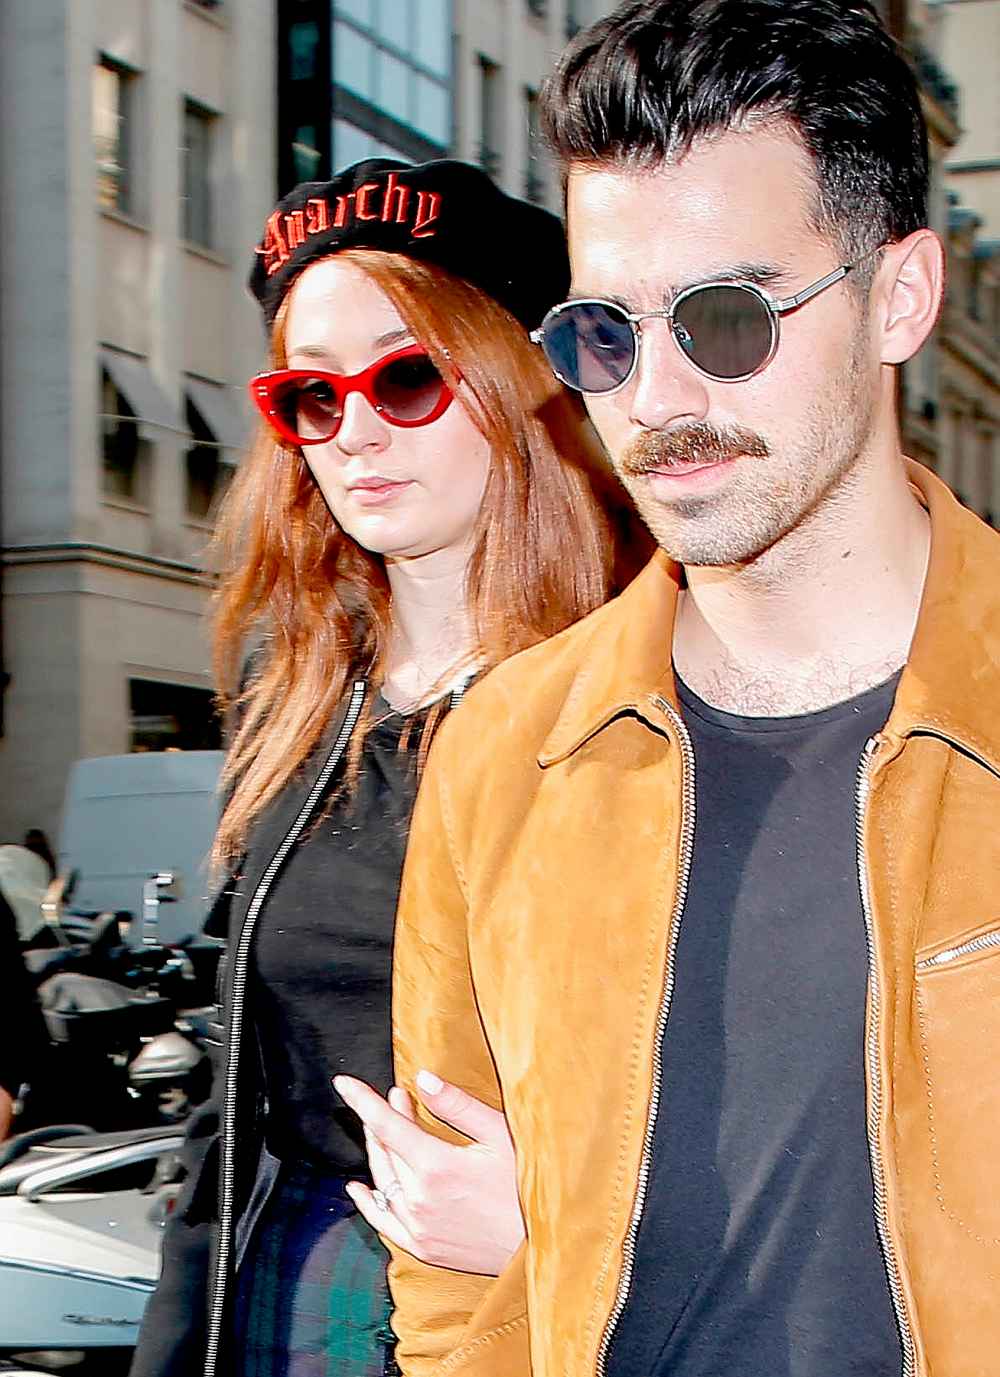 Newly engaged singer Joe Jonas and Game of Thrones' star Sophie Turner enjoying a shopping day in Paris on October 17, 2017.